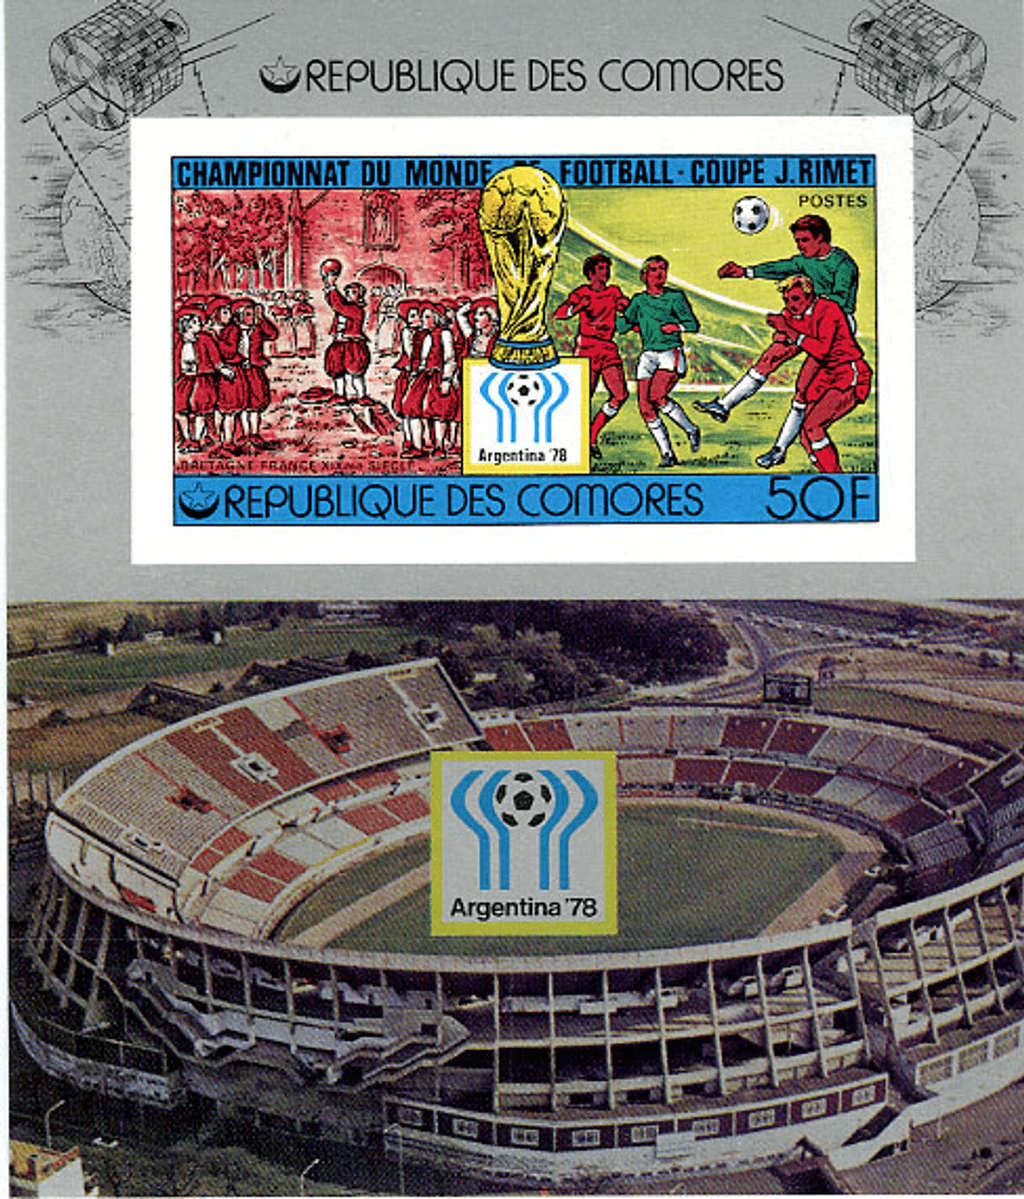 Football Worldcup Argentina 1978